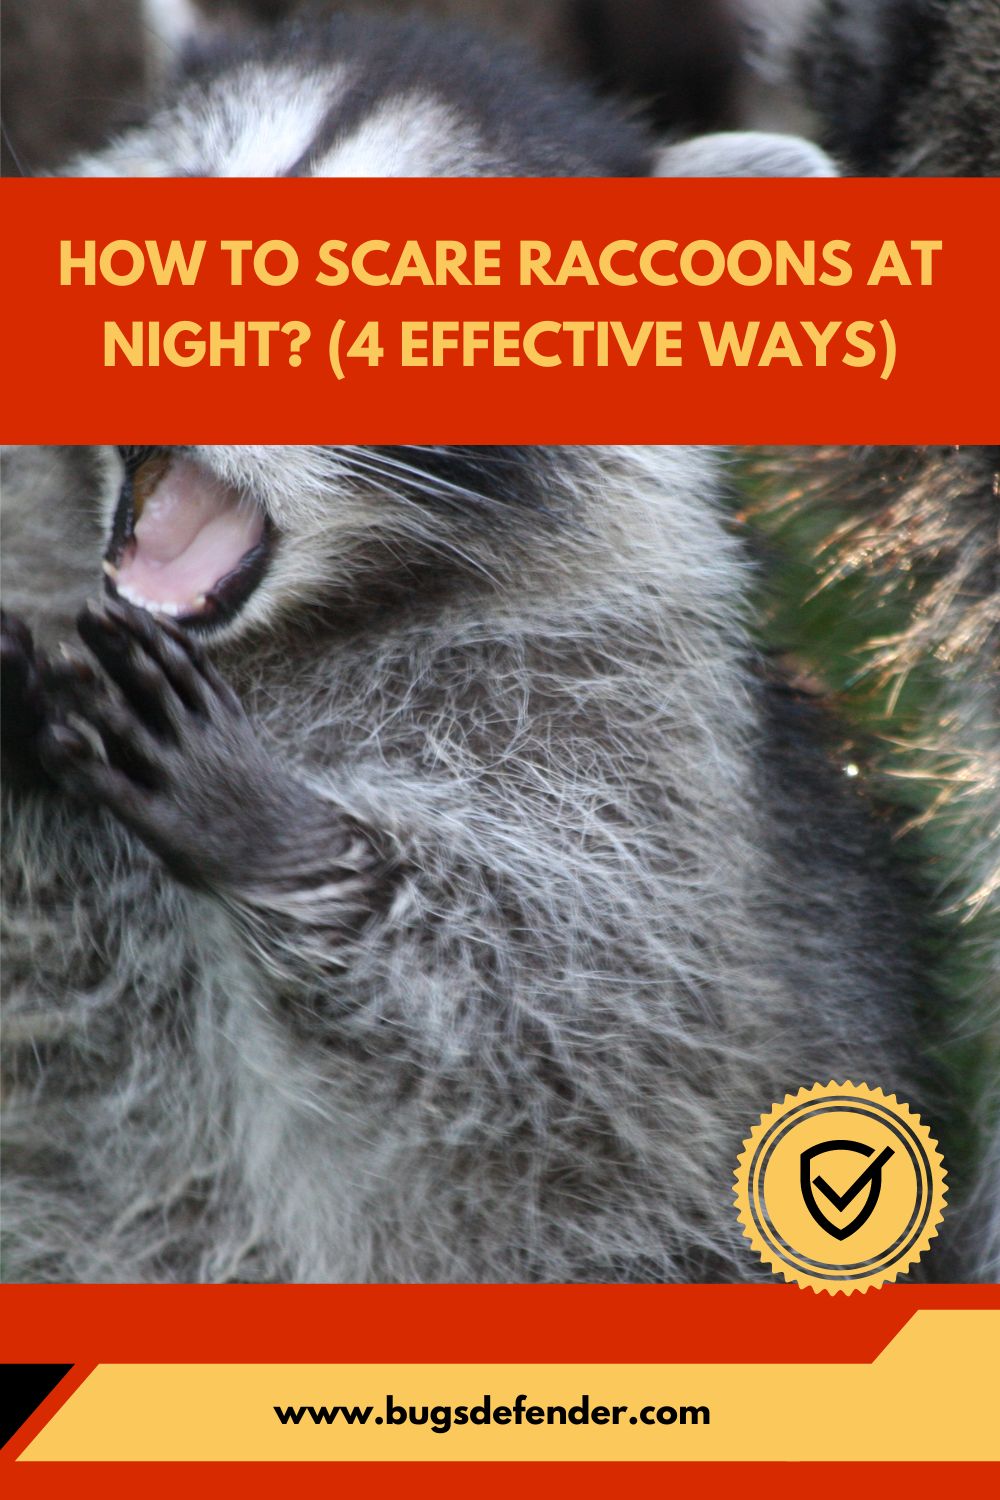 How to Scare Raccoons at Night (4 Effective Ways)pin2